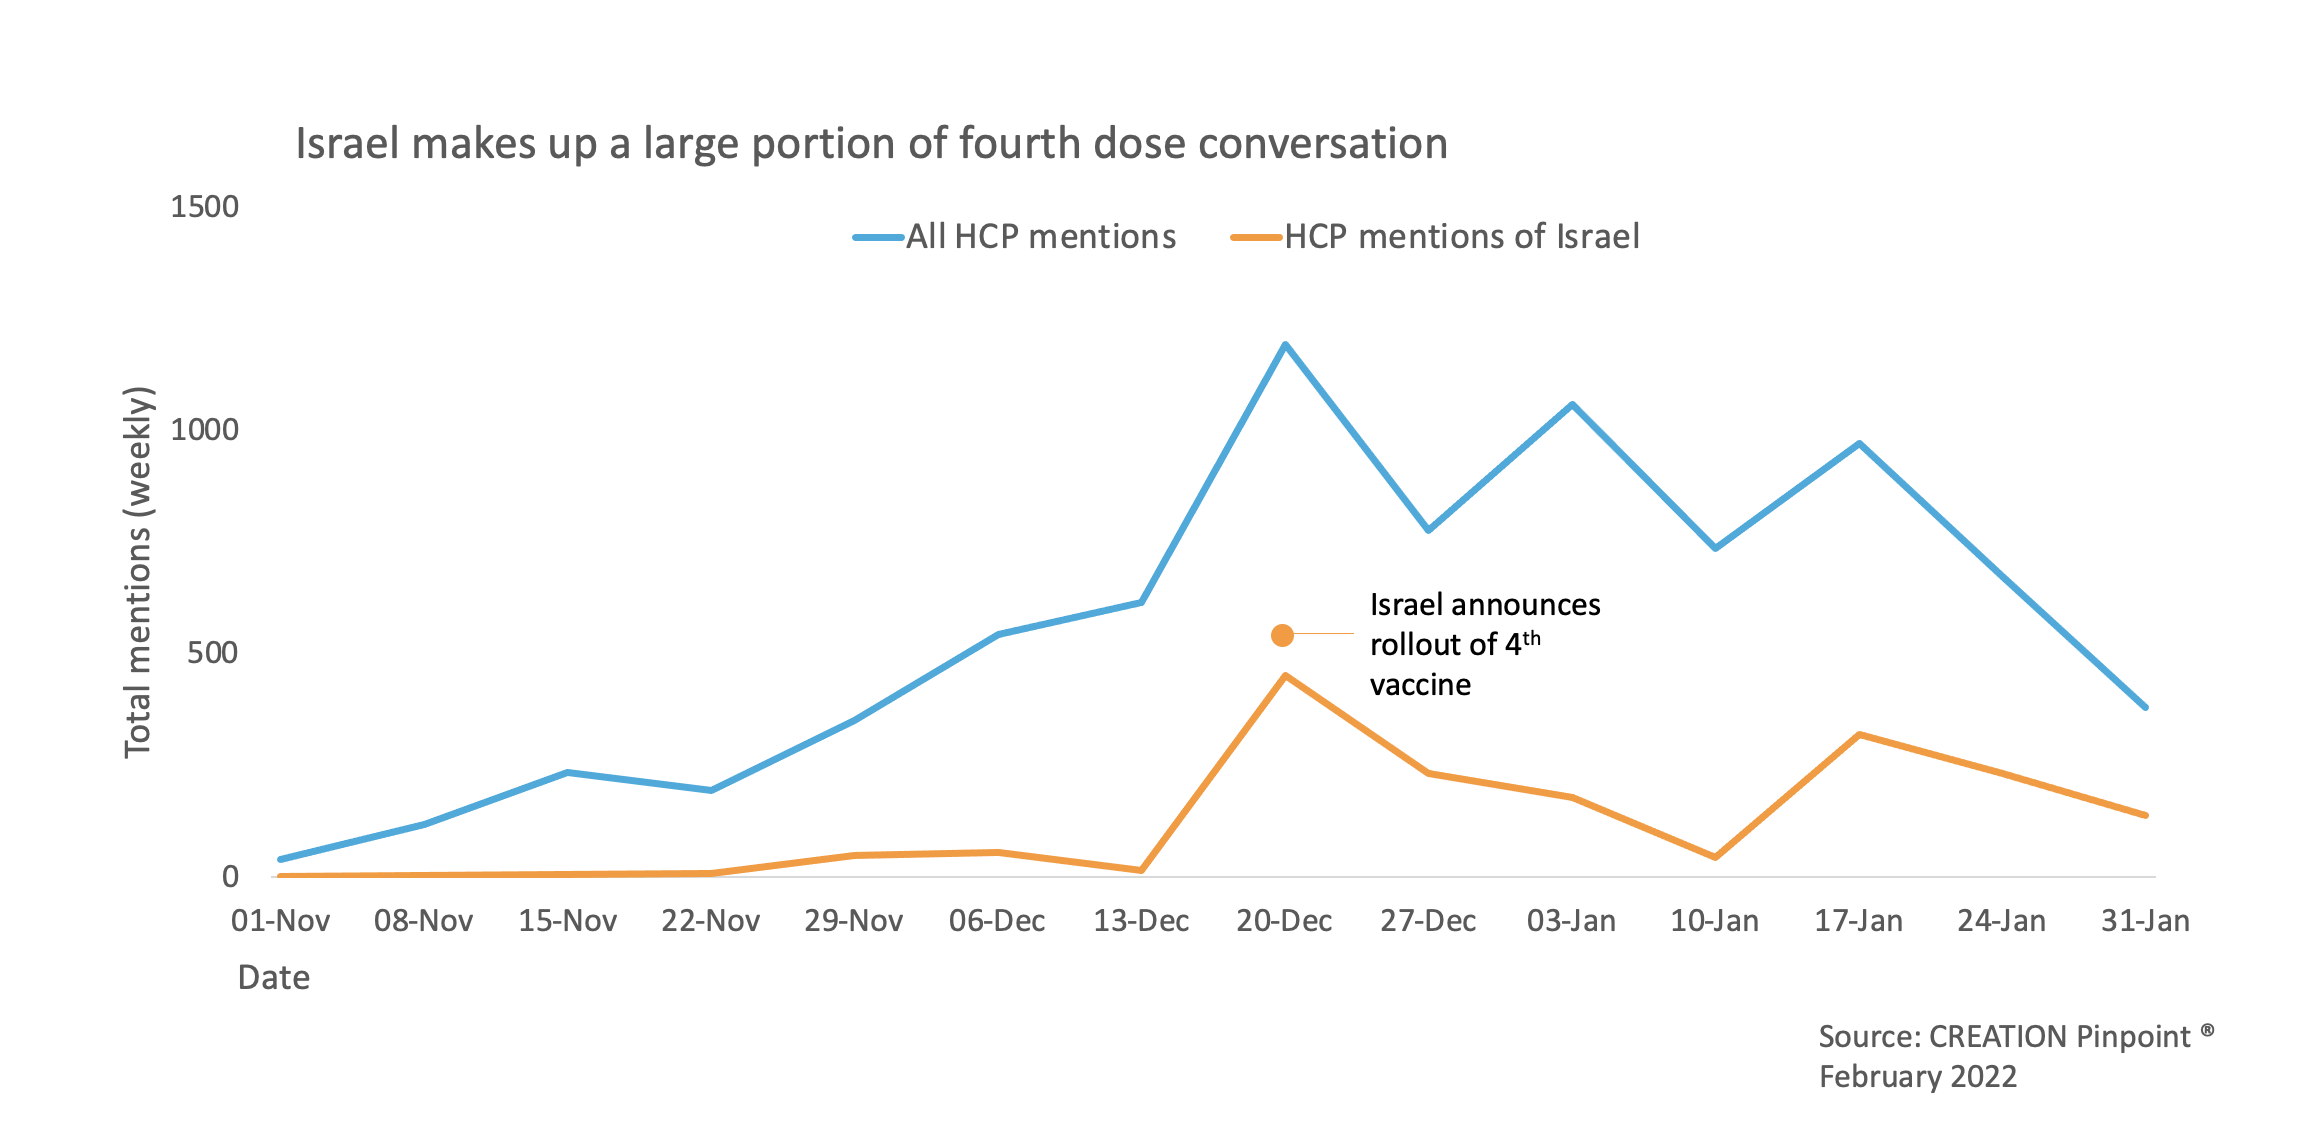 An image of a graph showing that Israel makes up a large portion of the conversation